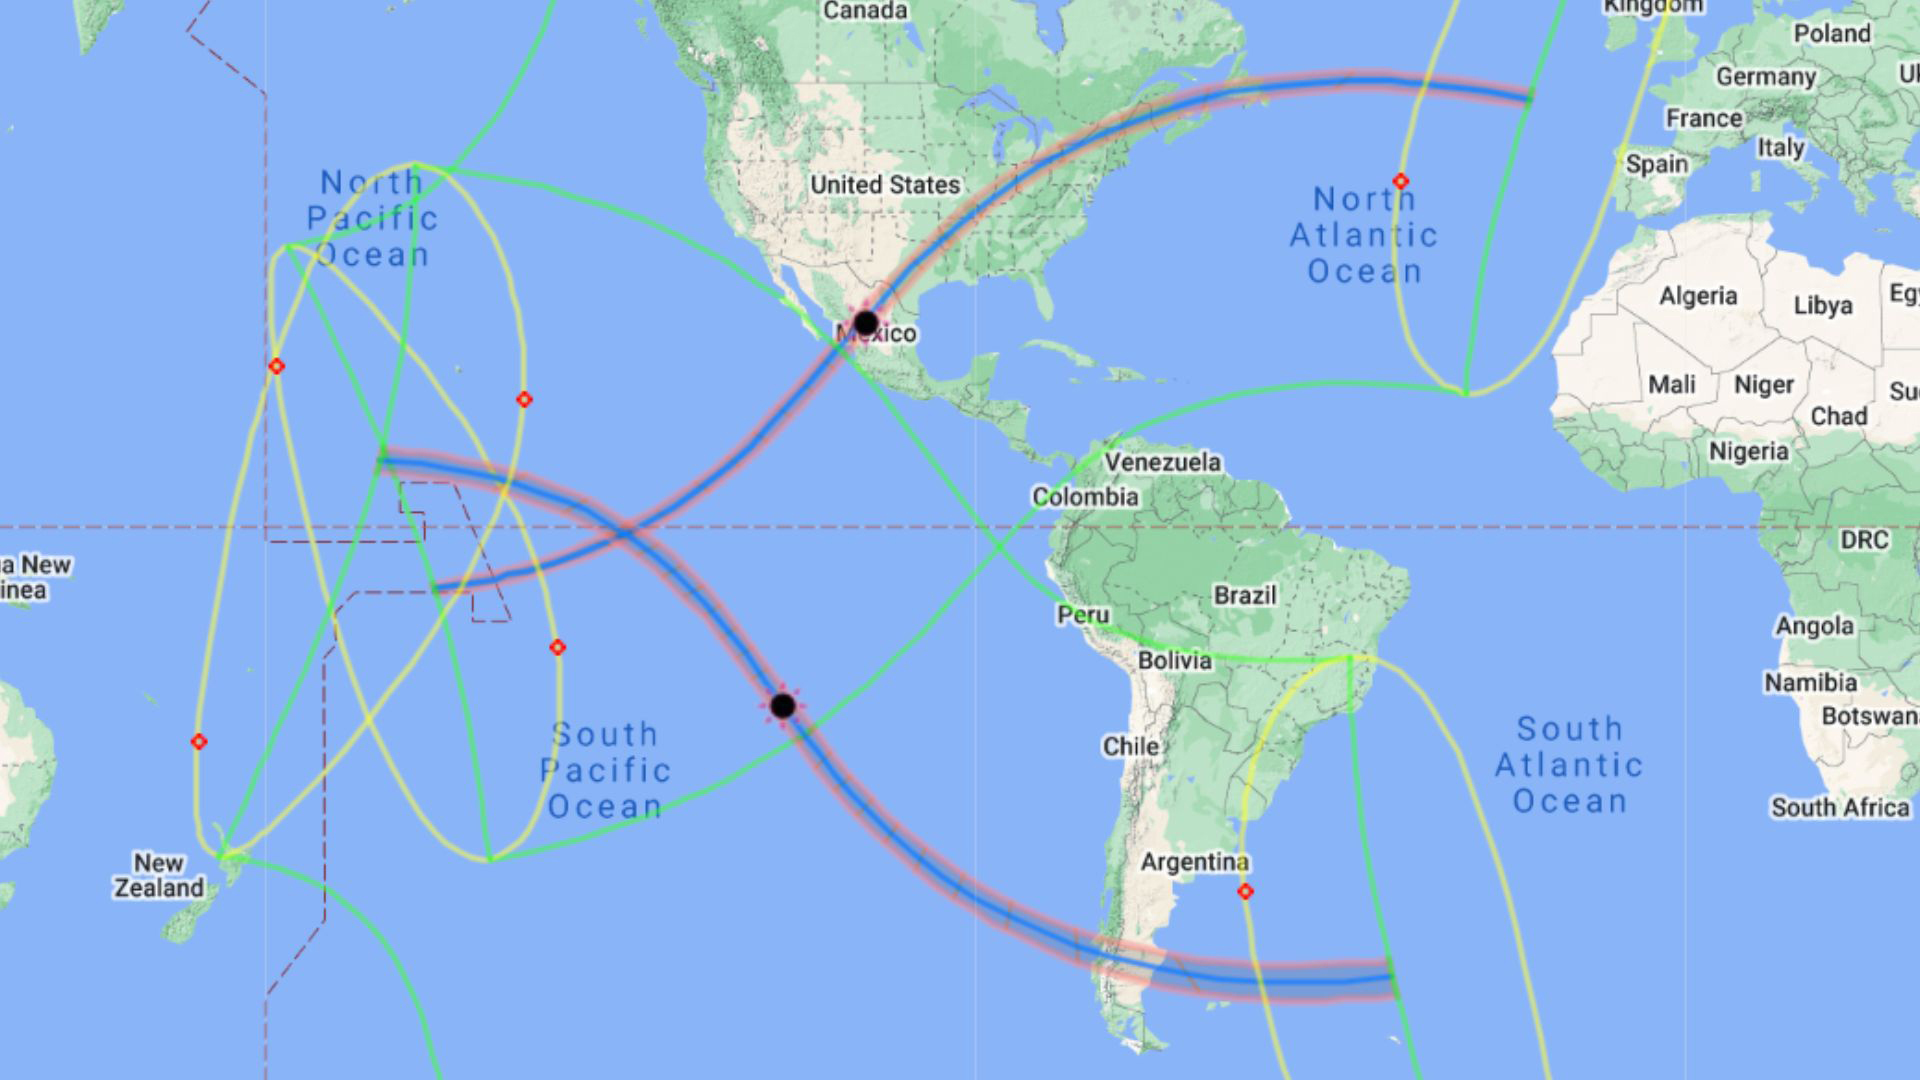 The paths of 2024's two central solar eclipses cross on the equator, reflecting that they occur almost six months apart when Earth is tilted differently.